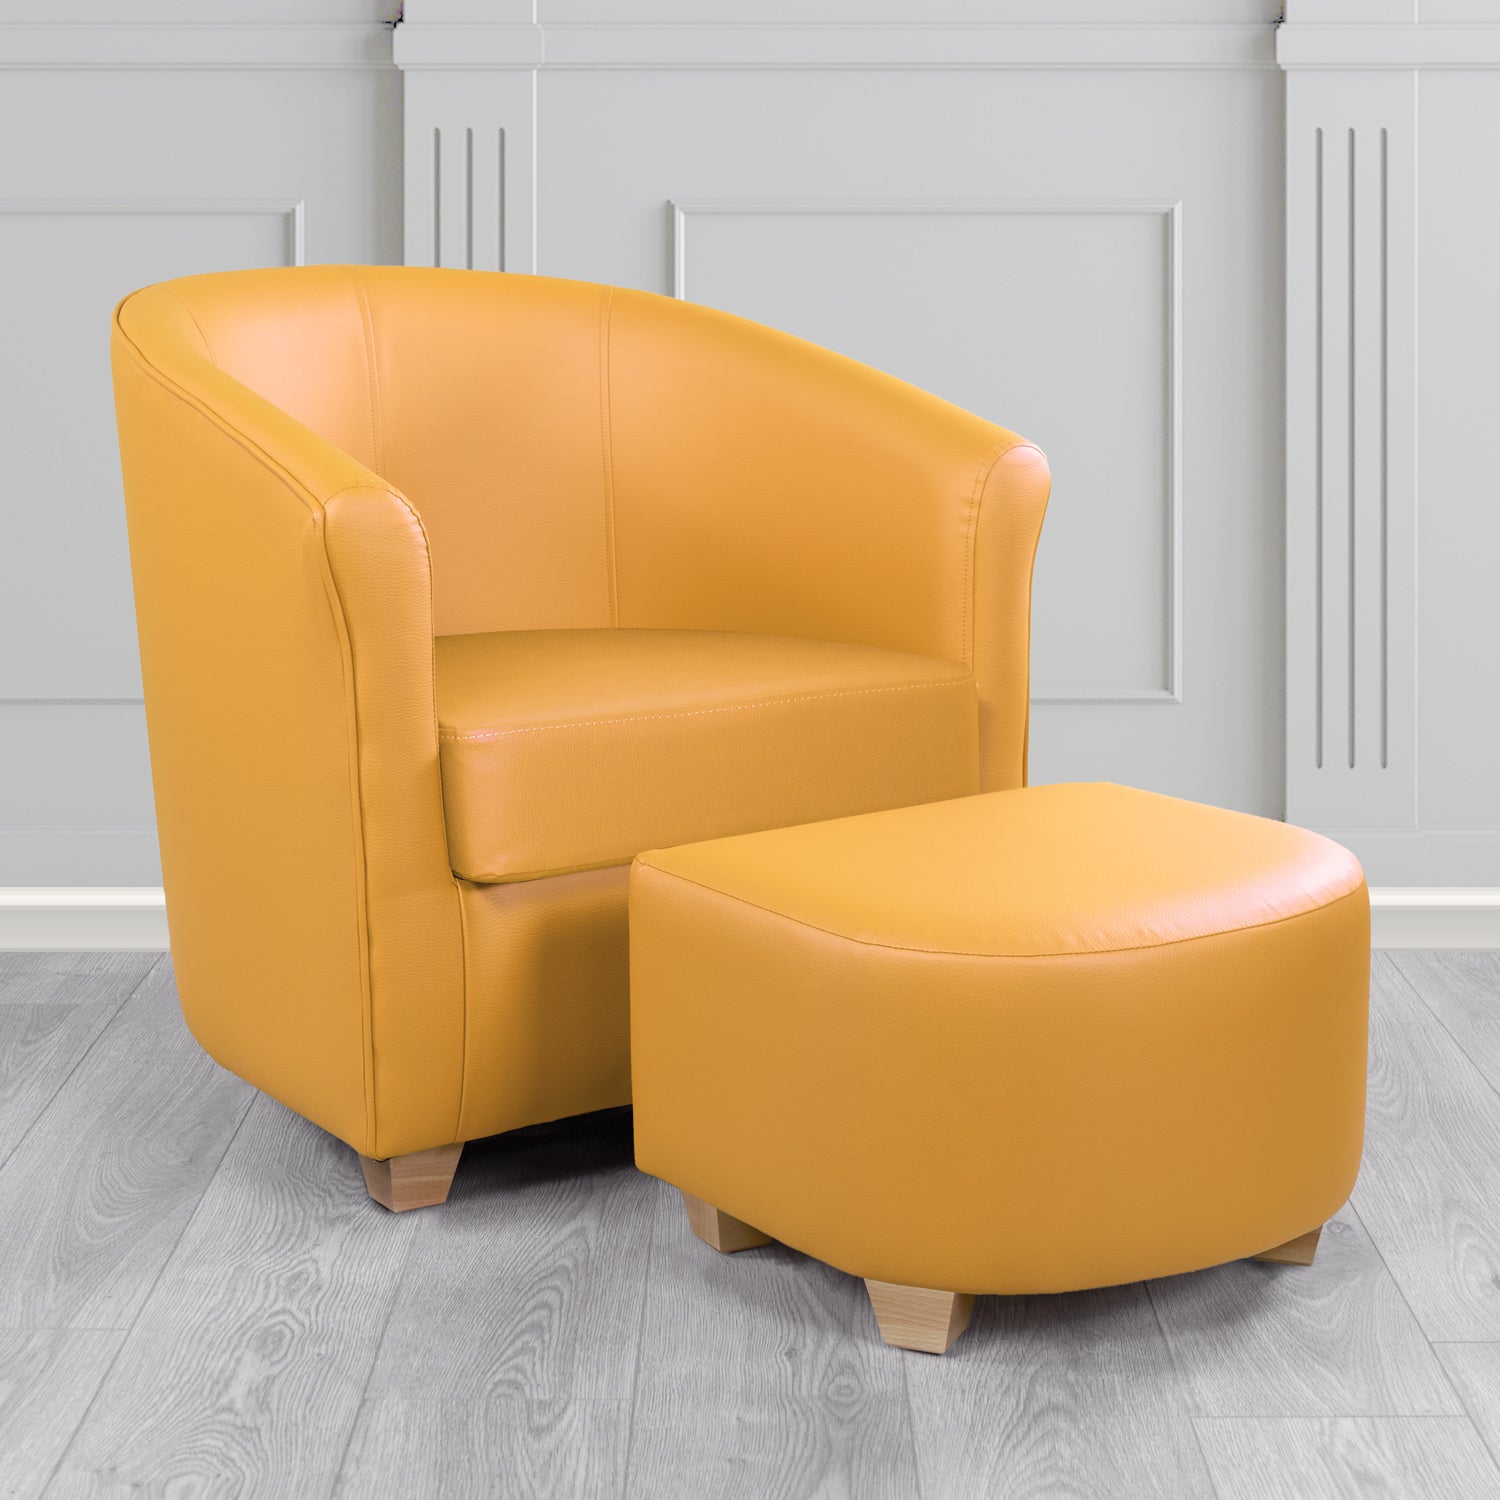 Cannes Tub Chair with Footstool Set in Just Colour Sunblush Crib 5 Faux Leather - The Tub Chair Shop